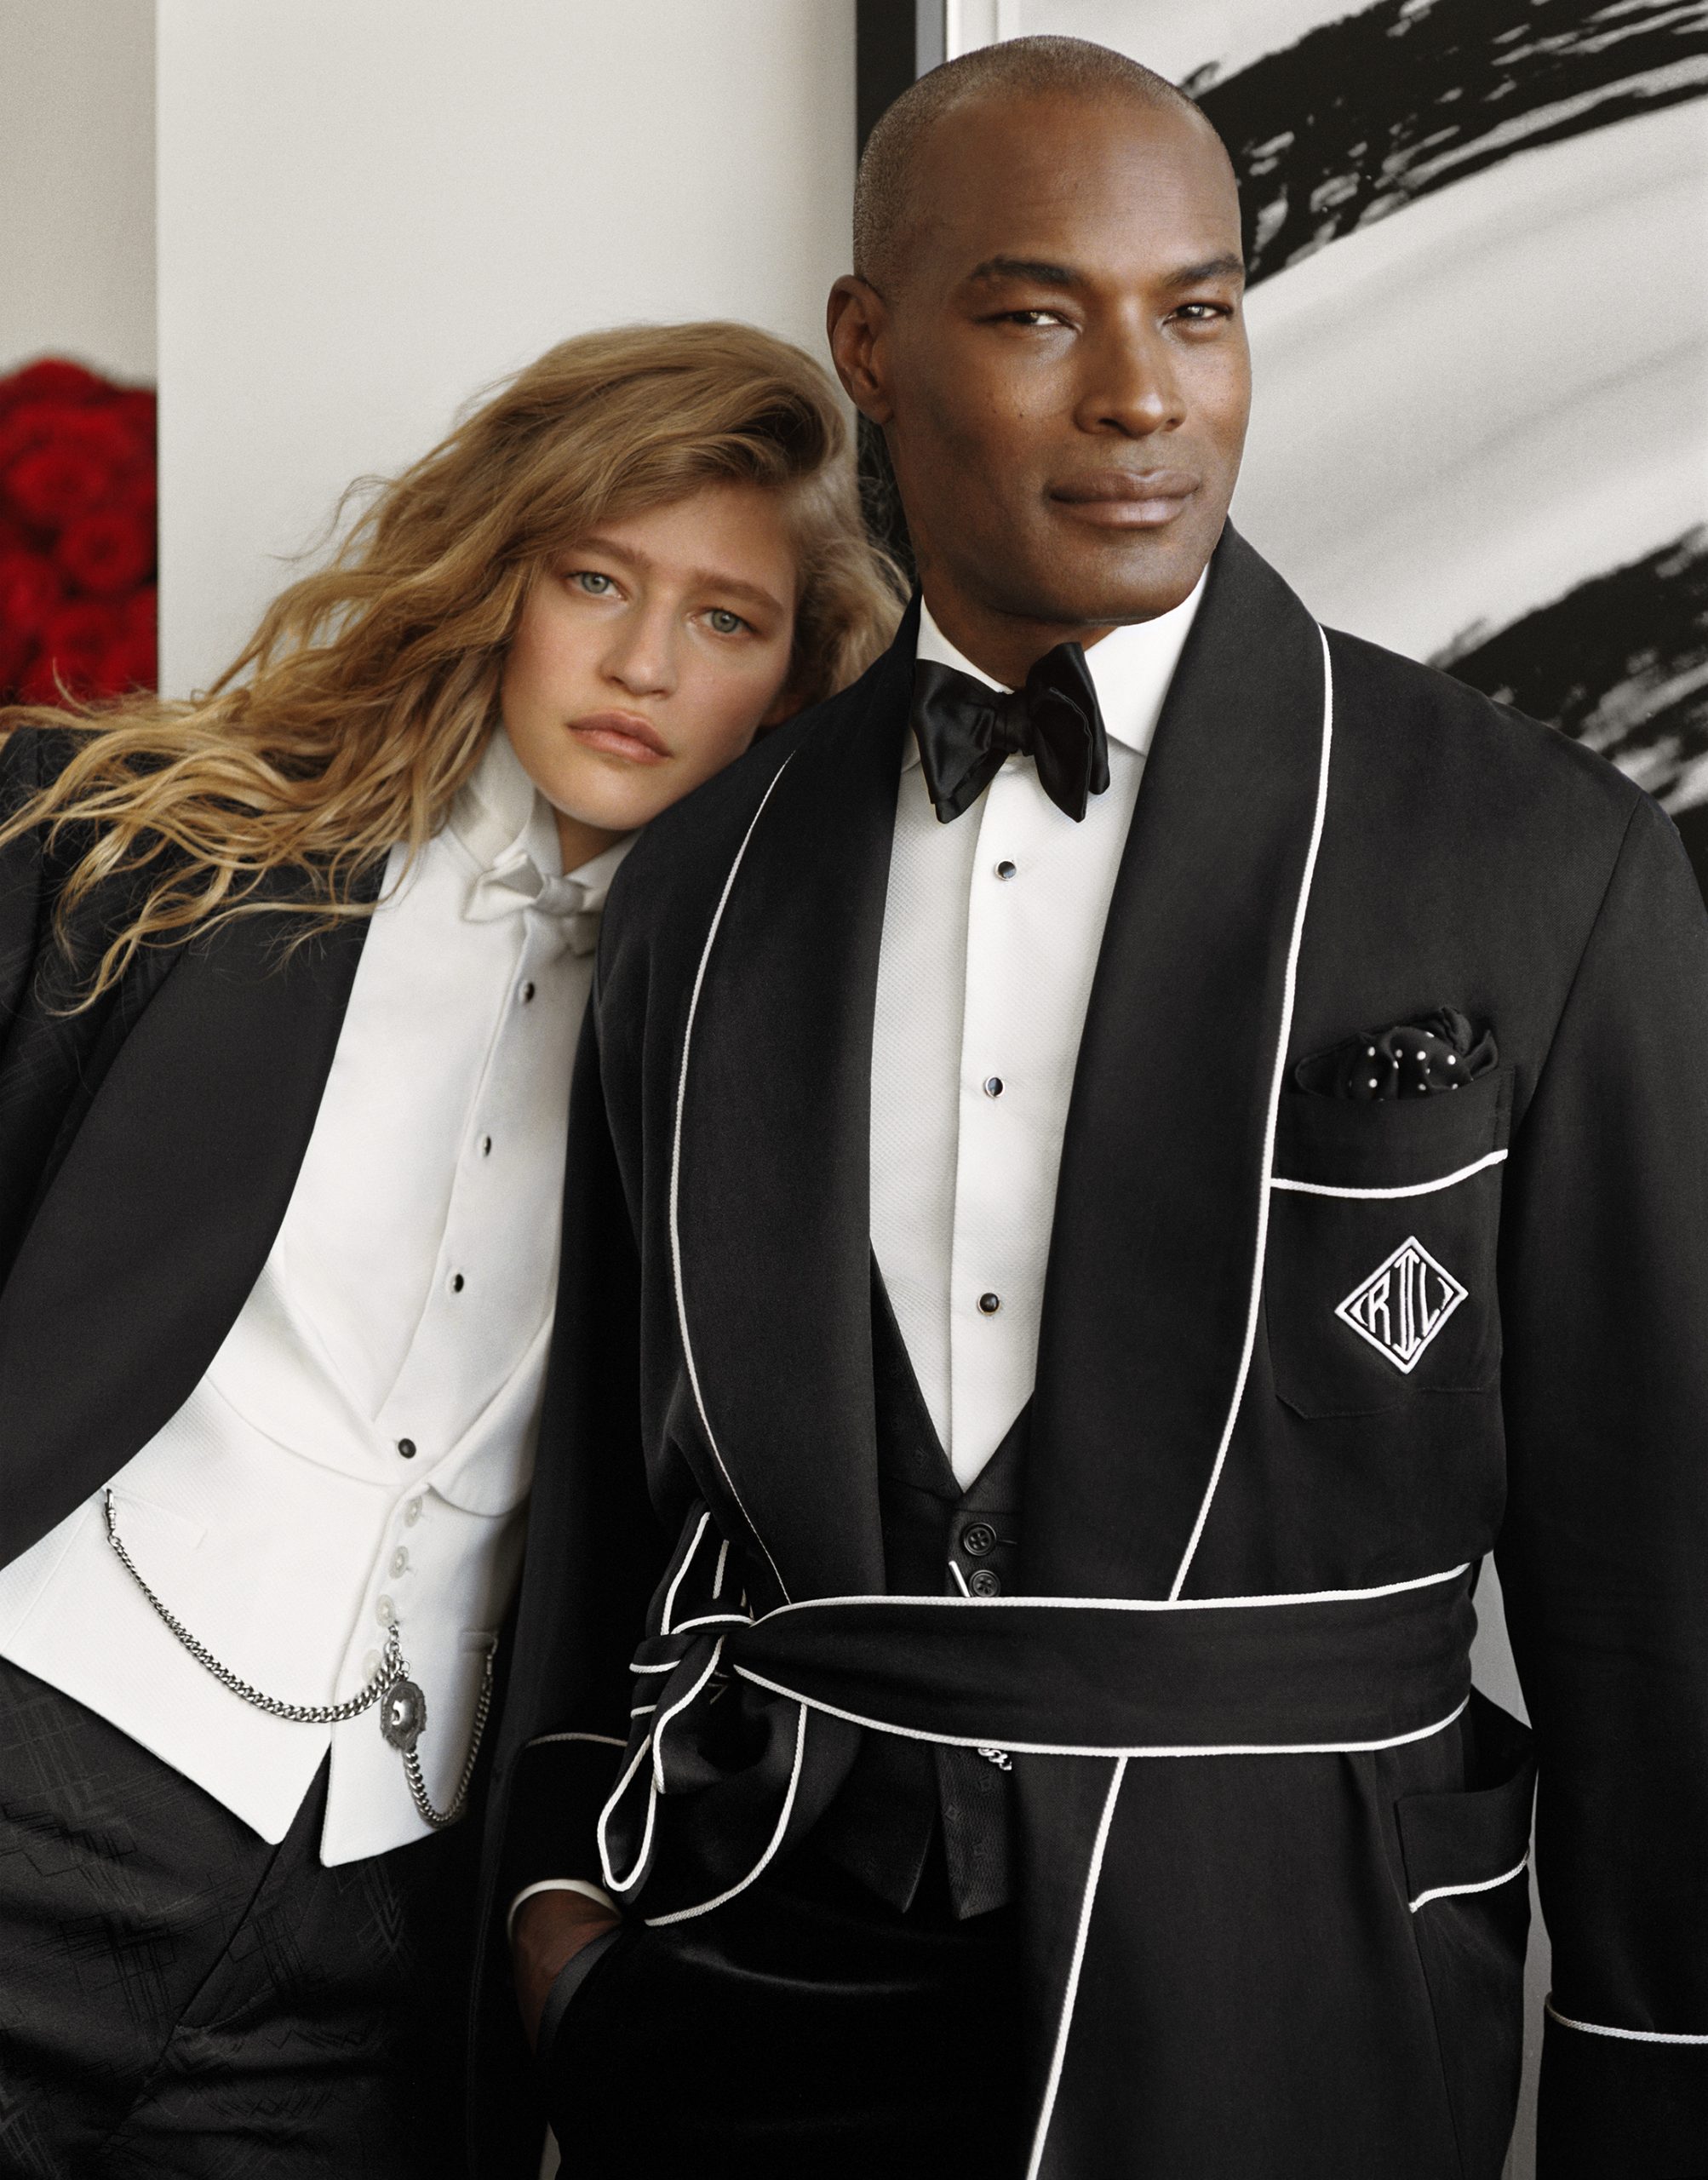 Indigenation - Holiday Campaign with Ralph Lauren